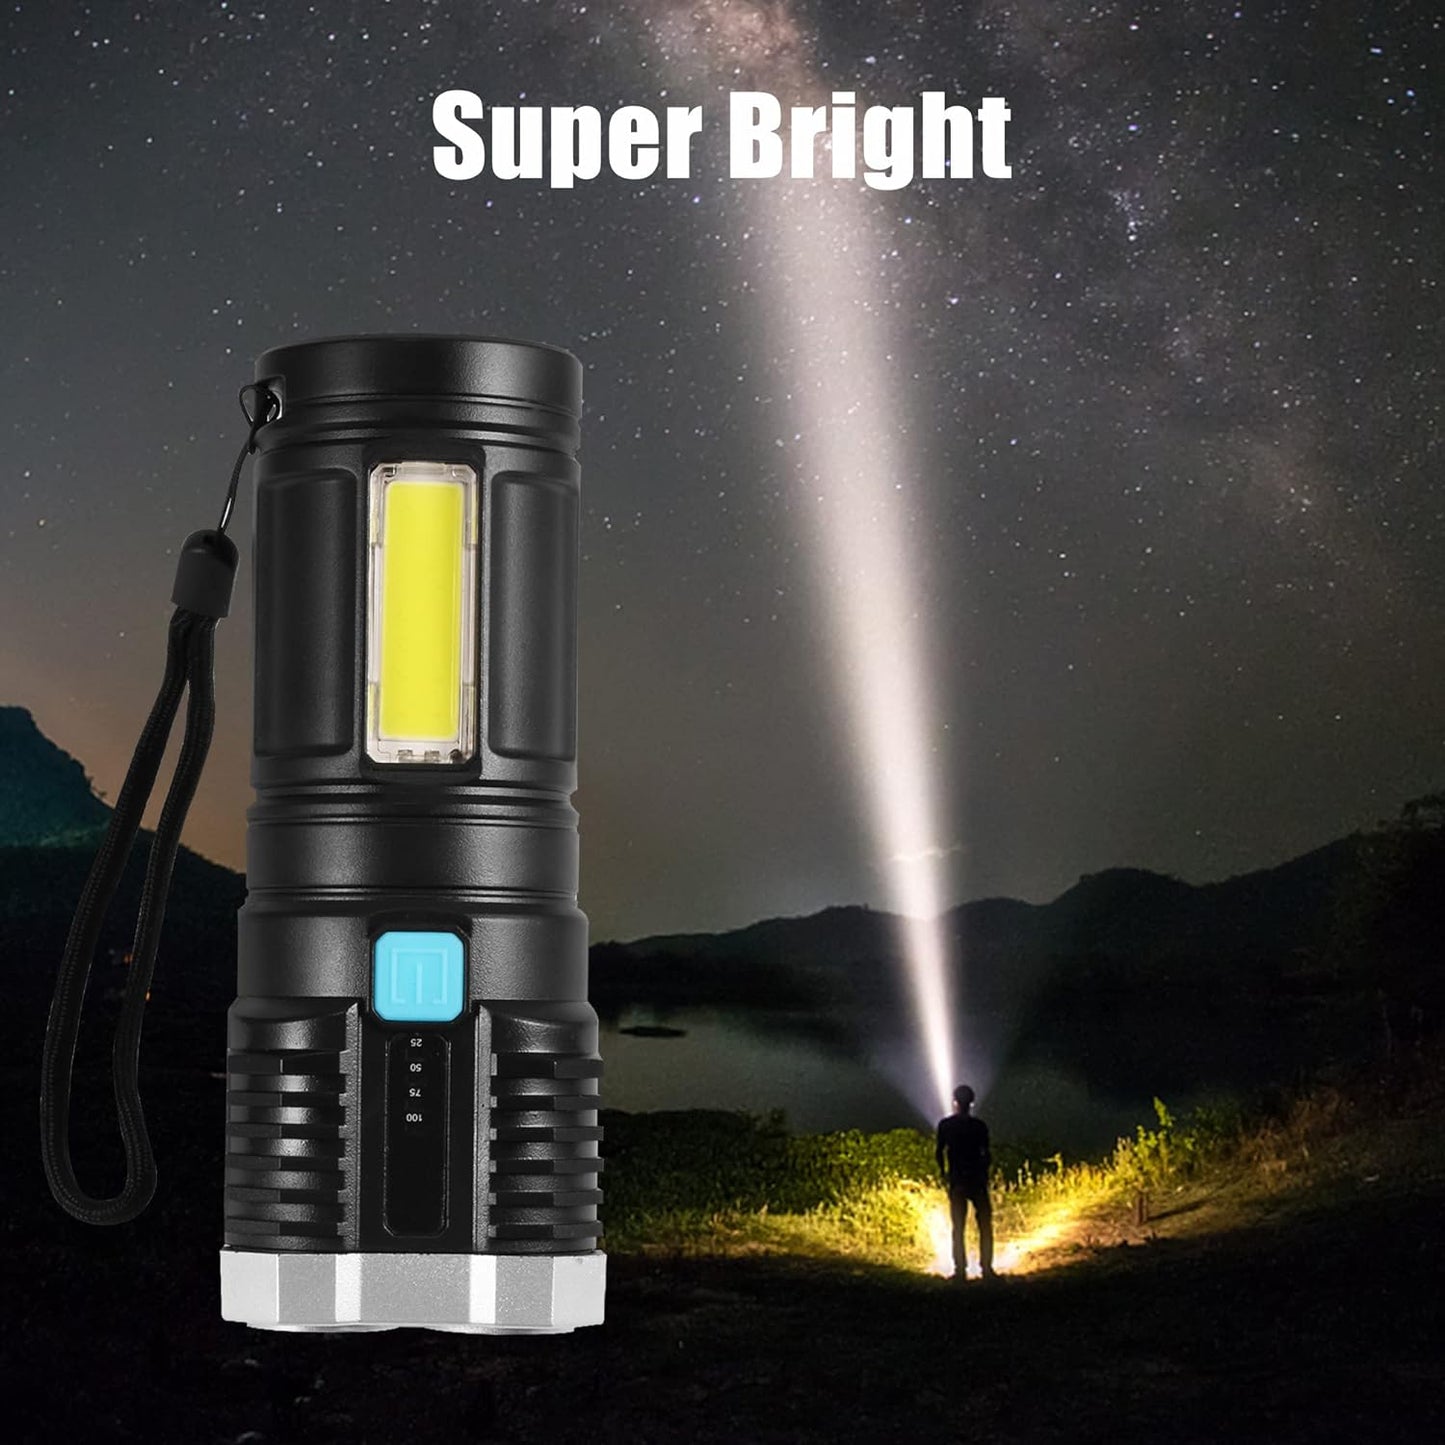 Multifunctional Strong 4 LED Torch Light, Portable Rechargeable Flashlight Long Distance Beam Range 800 Lumens COB Light 4 Mode Emergency for Hiking, Walking, Camping (4 LED Torch)